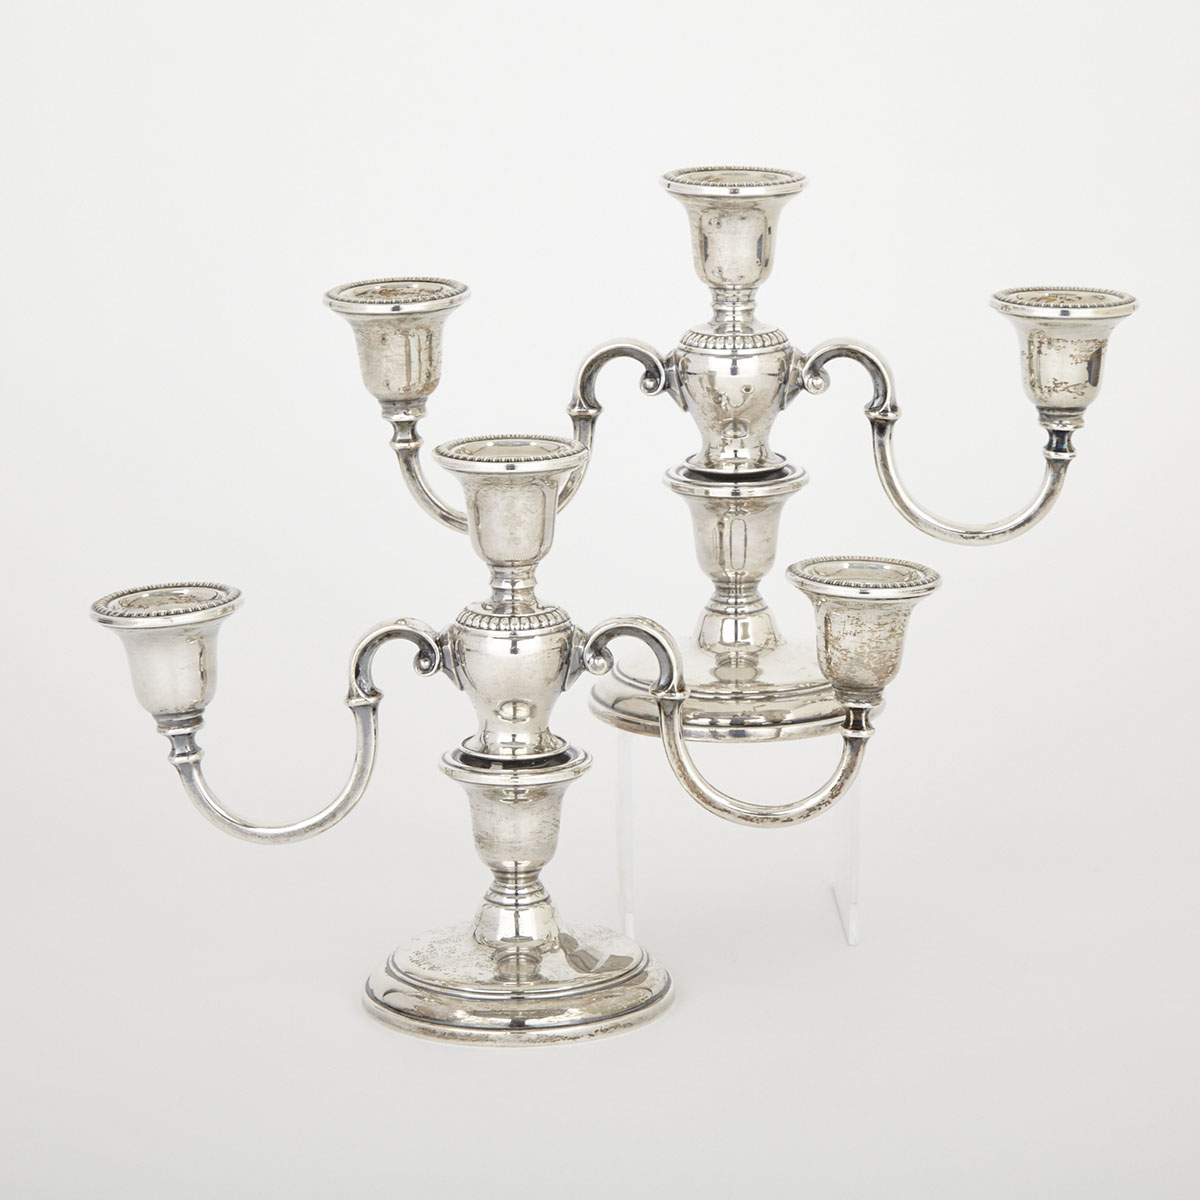 Pair of Canadian Silver Three-Light Candelabra, Henry Birks & Sons, Montreal, Que., 20th century